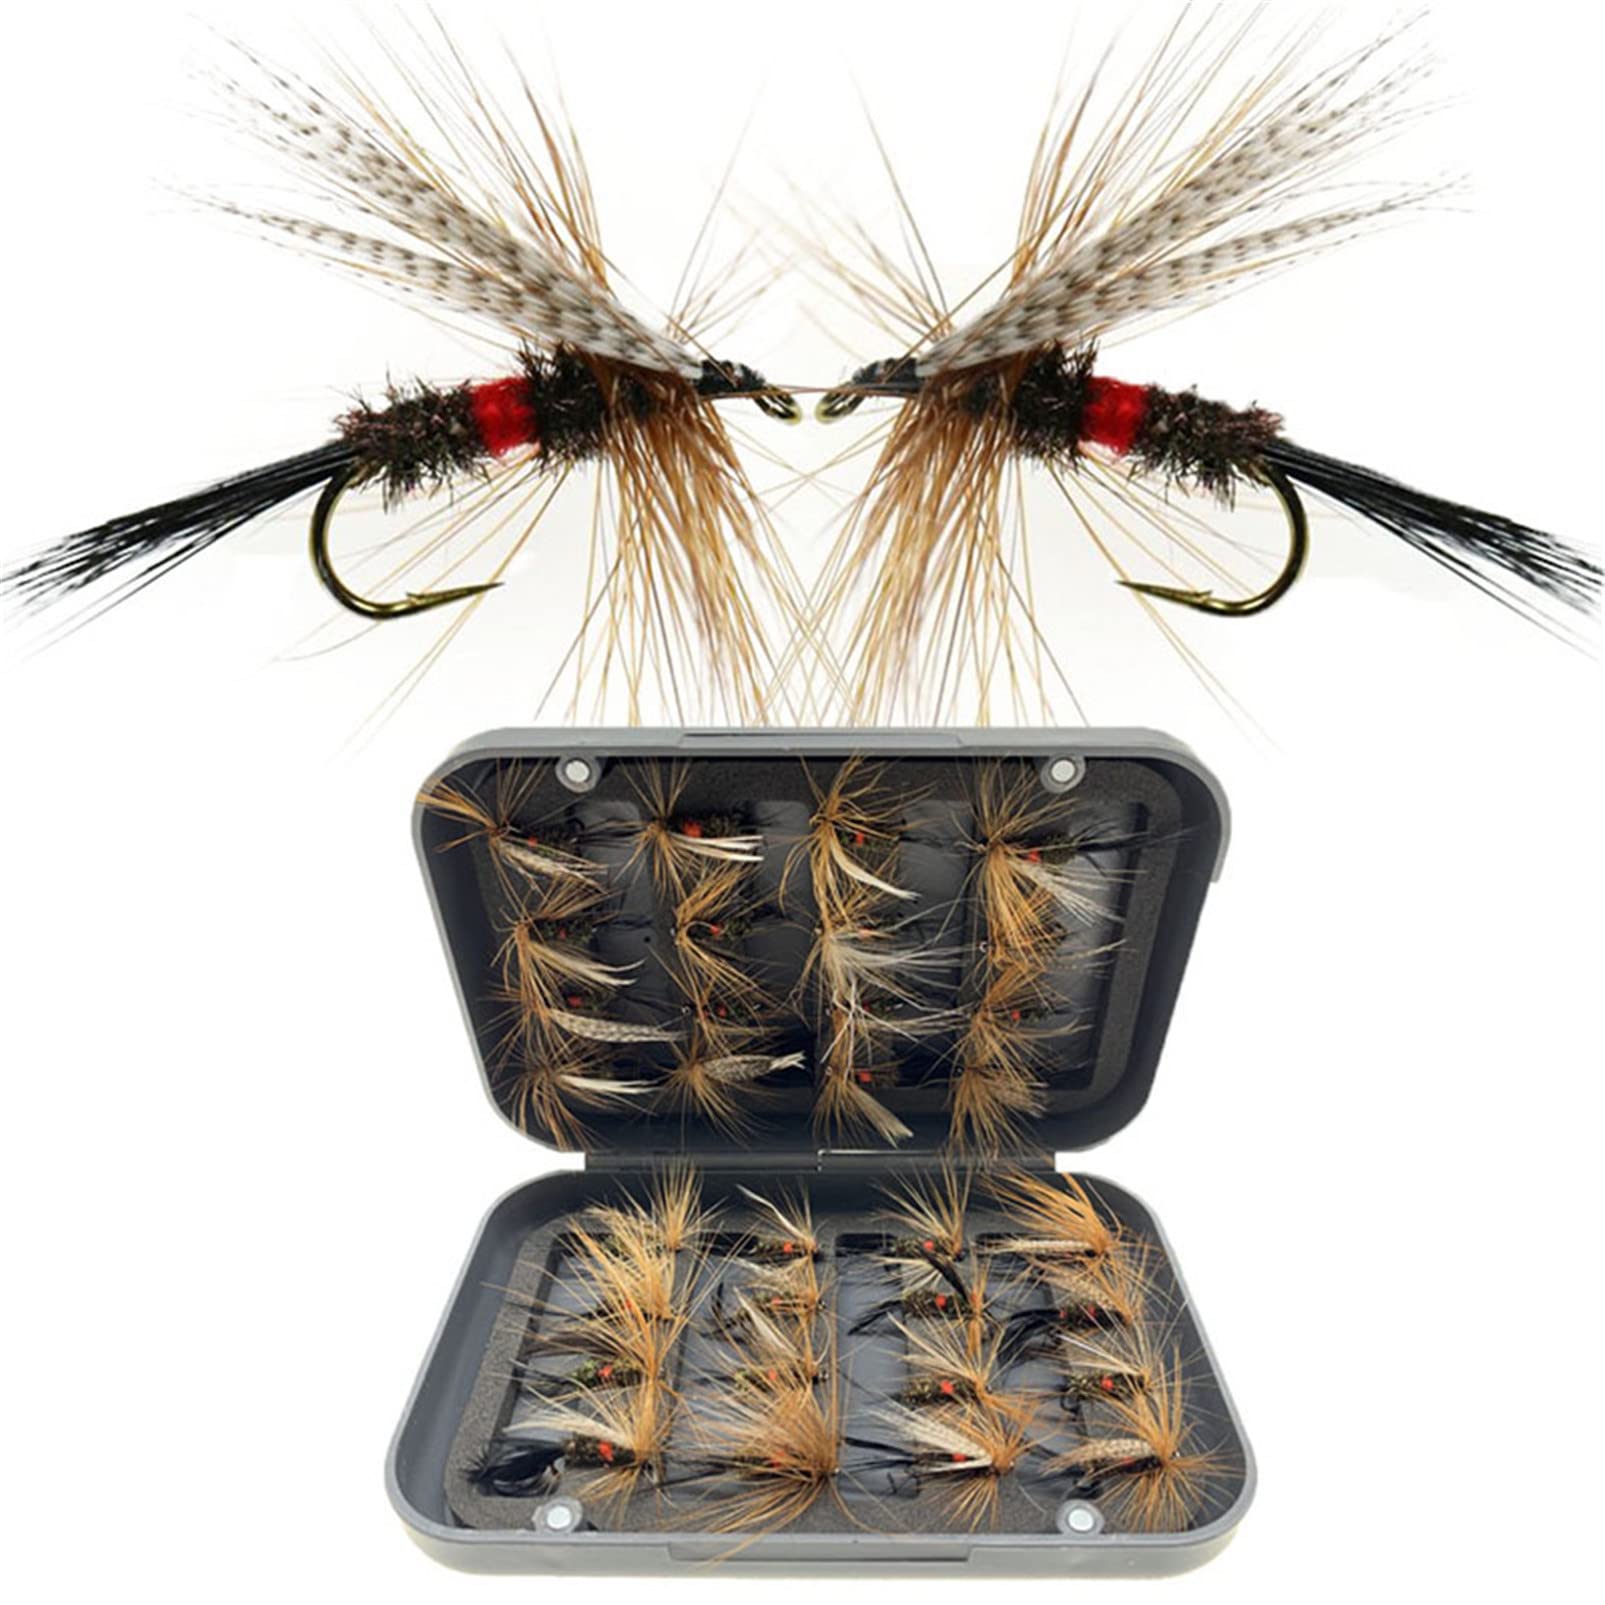 40pcs Fly Fishing Flies Kit Fly Assortment Trout Bass Fishing With Fly Box